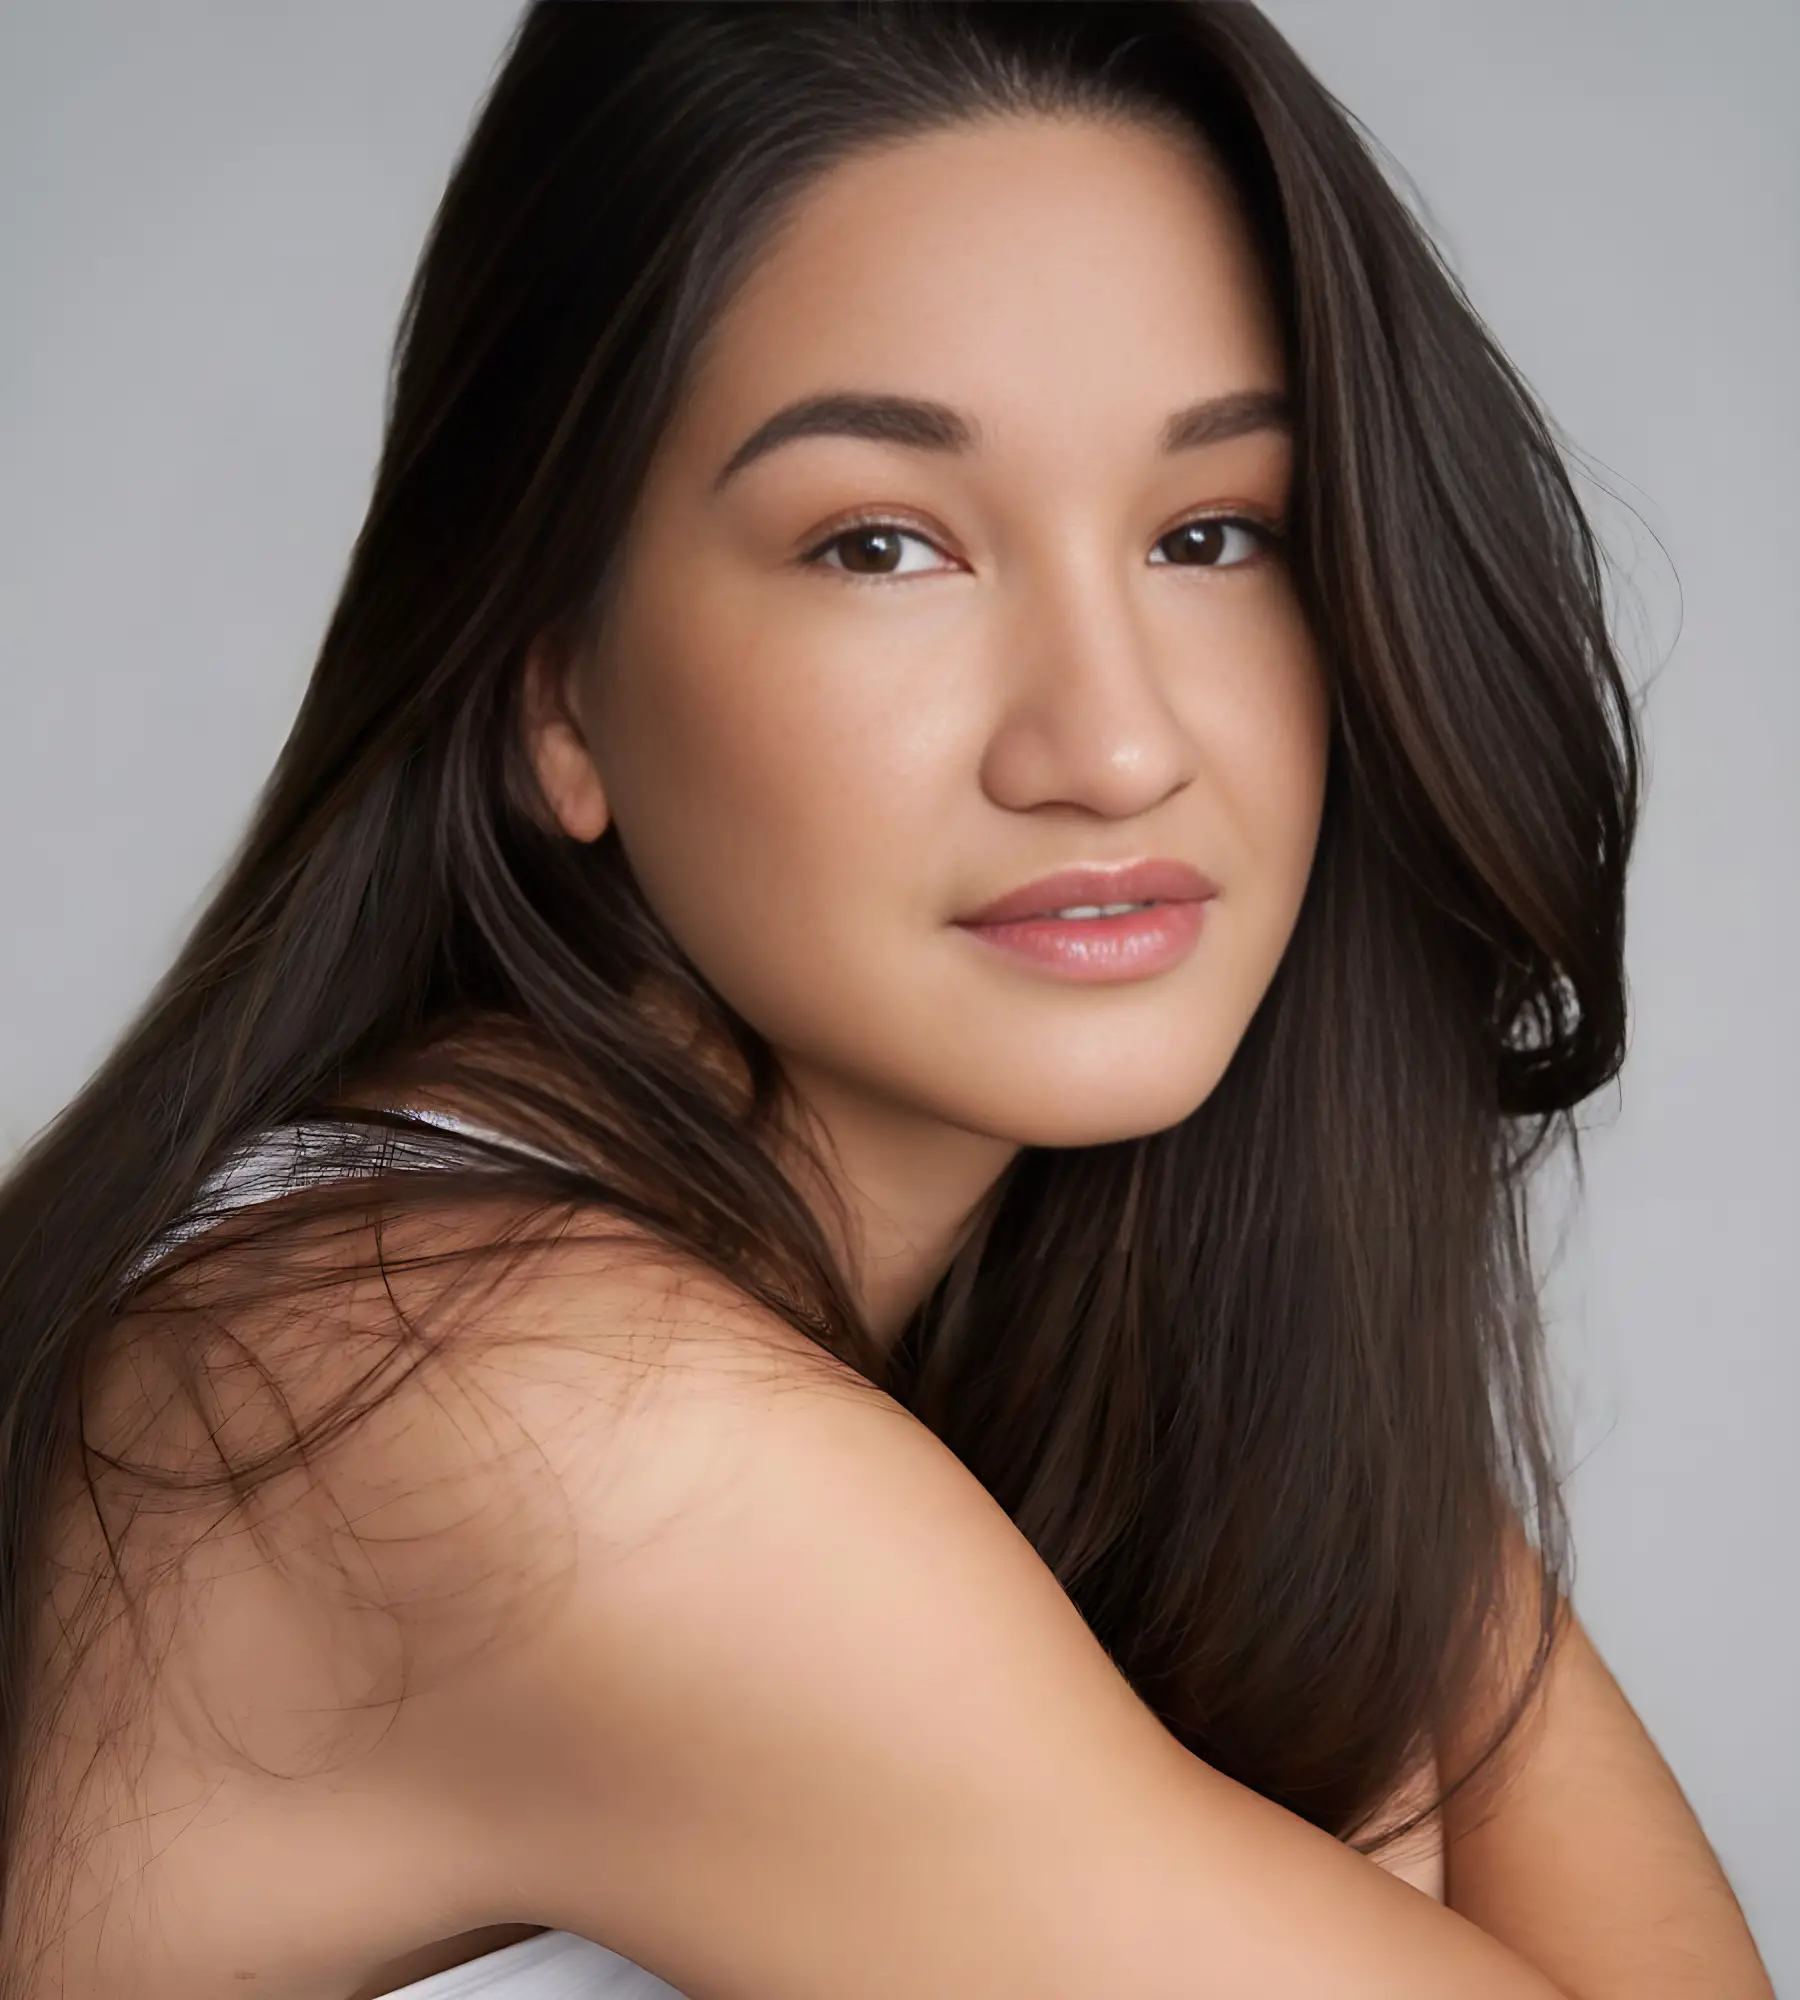 Dannie McCallum (Actress) Age, Wiki, Height, Weight, Movies, TV Shows, Boyfriend, Parents and More